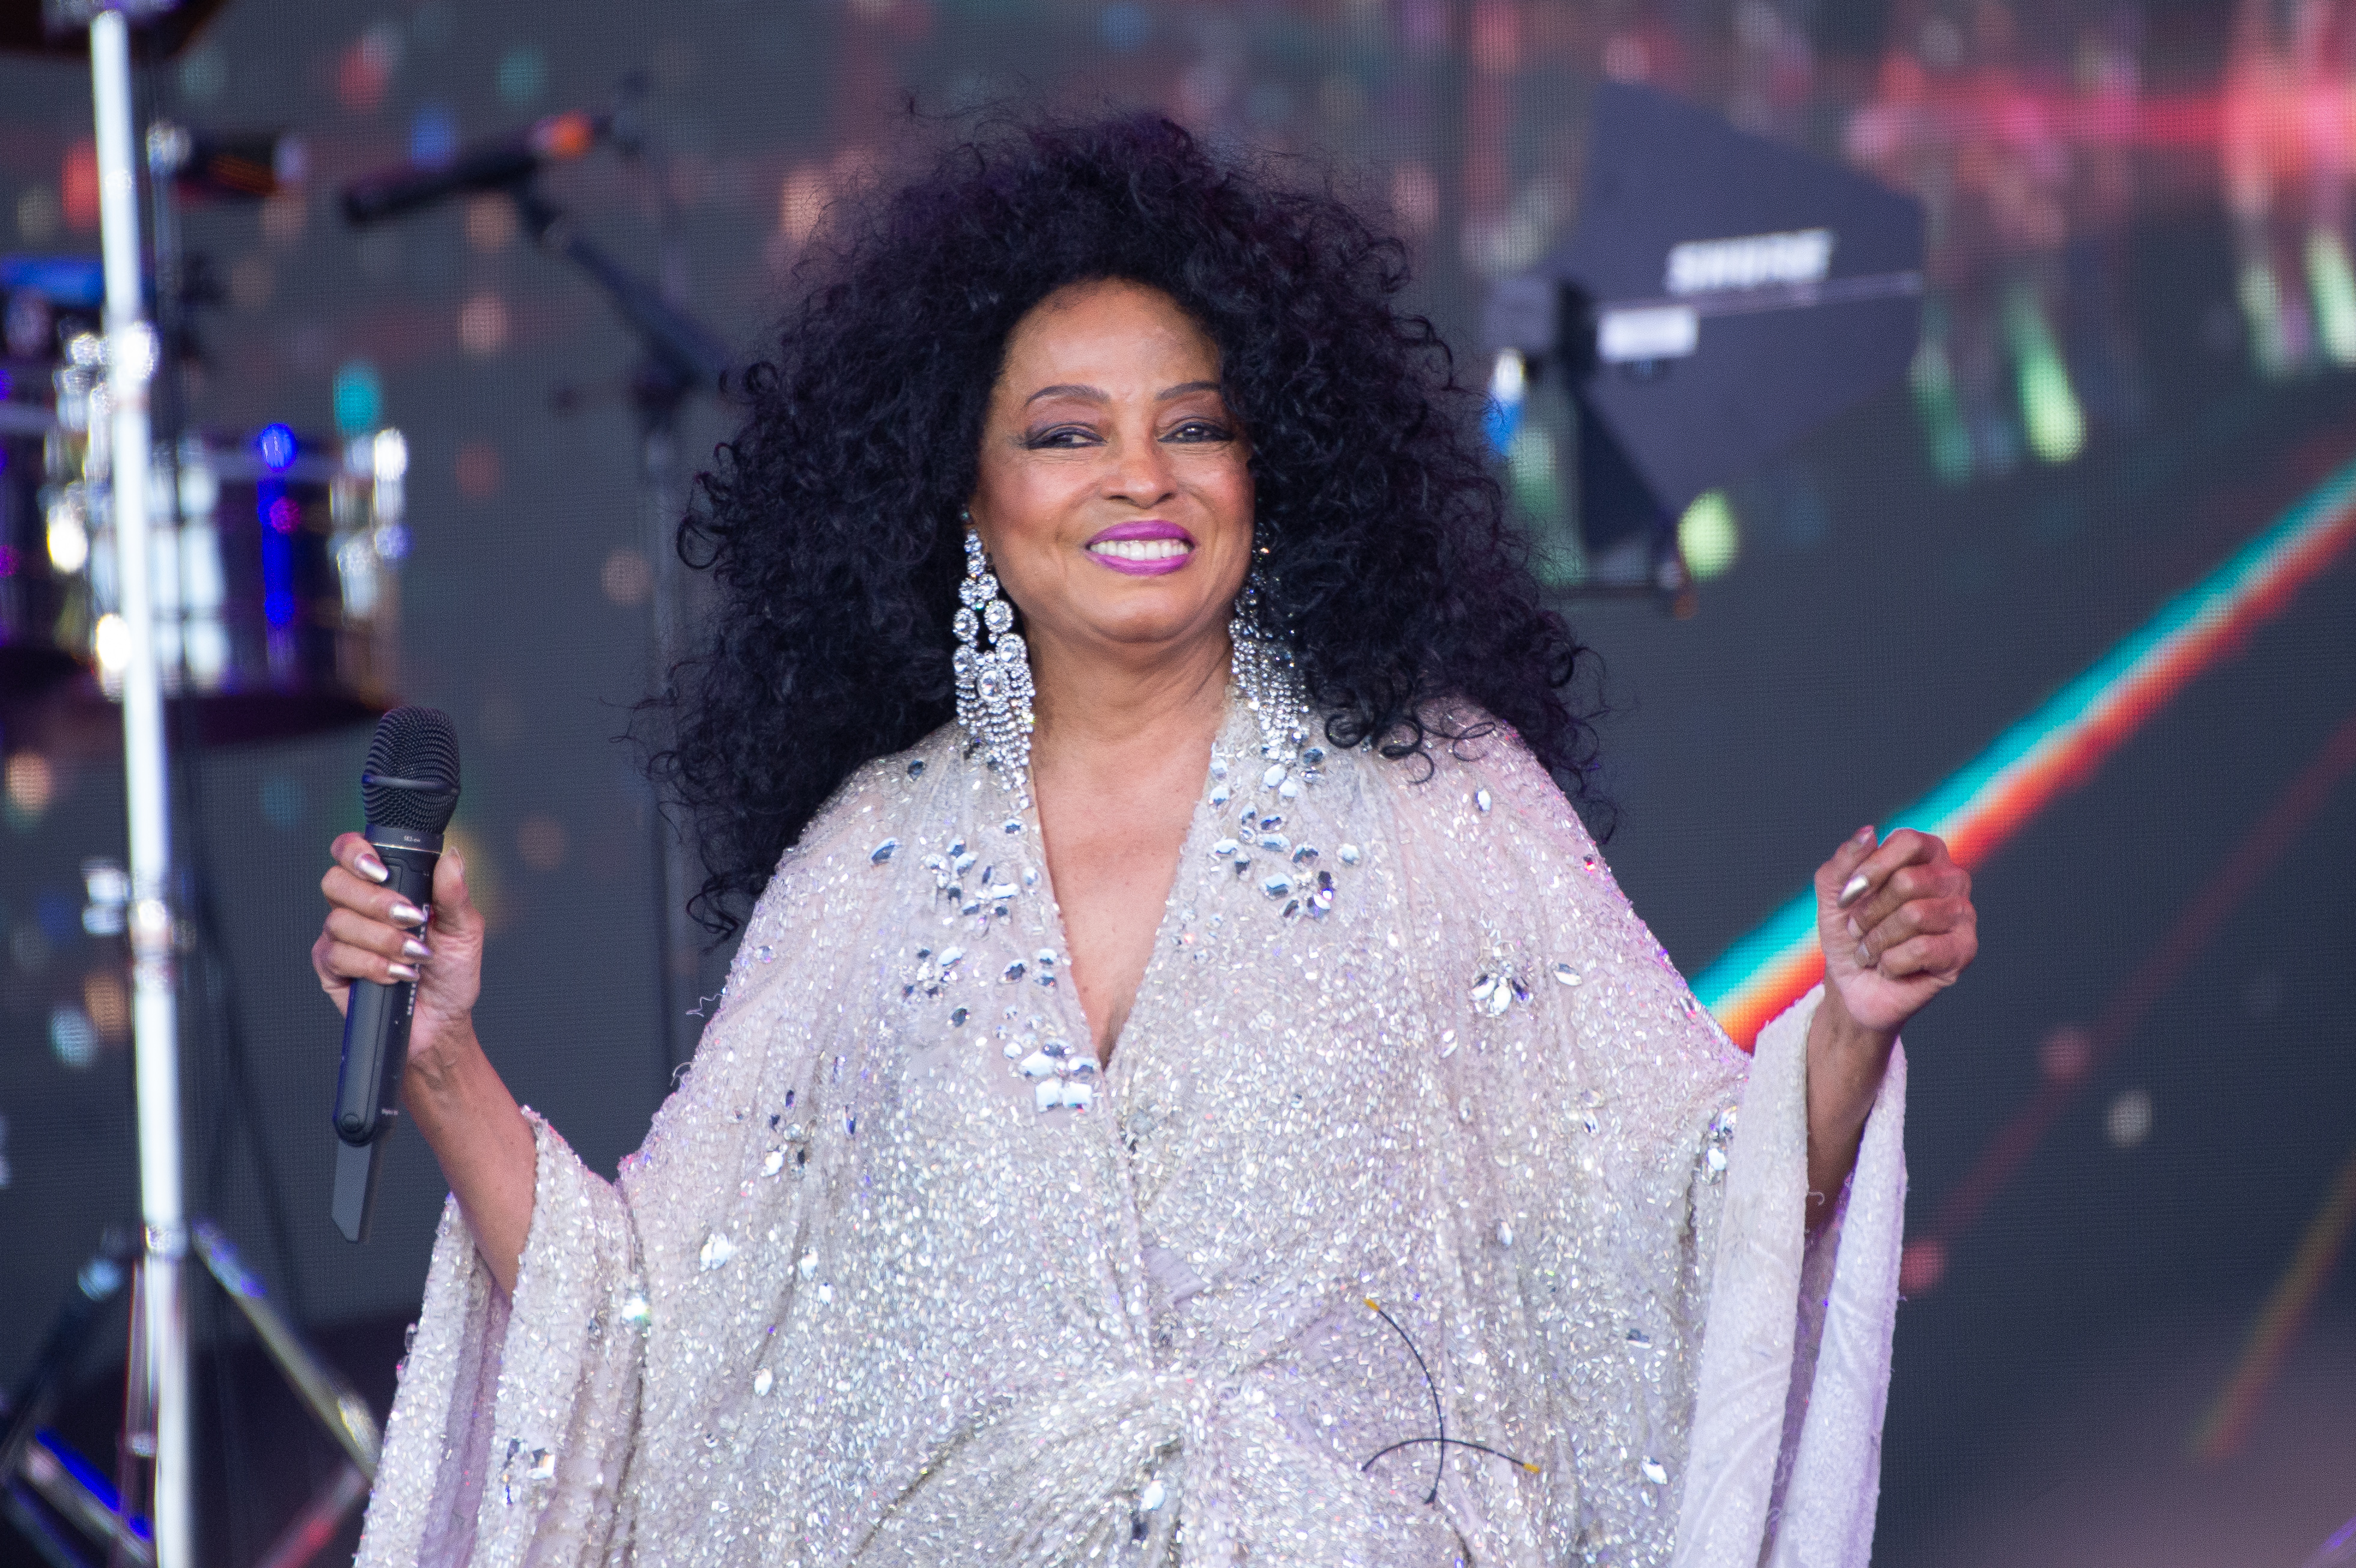 Diana Ross is performing on stage in Glastonbury, England